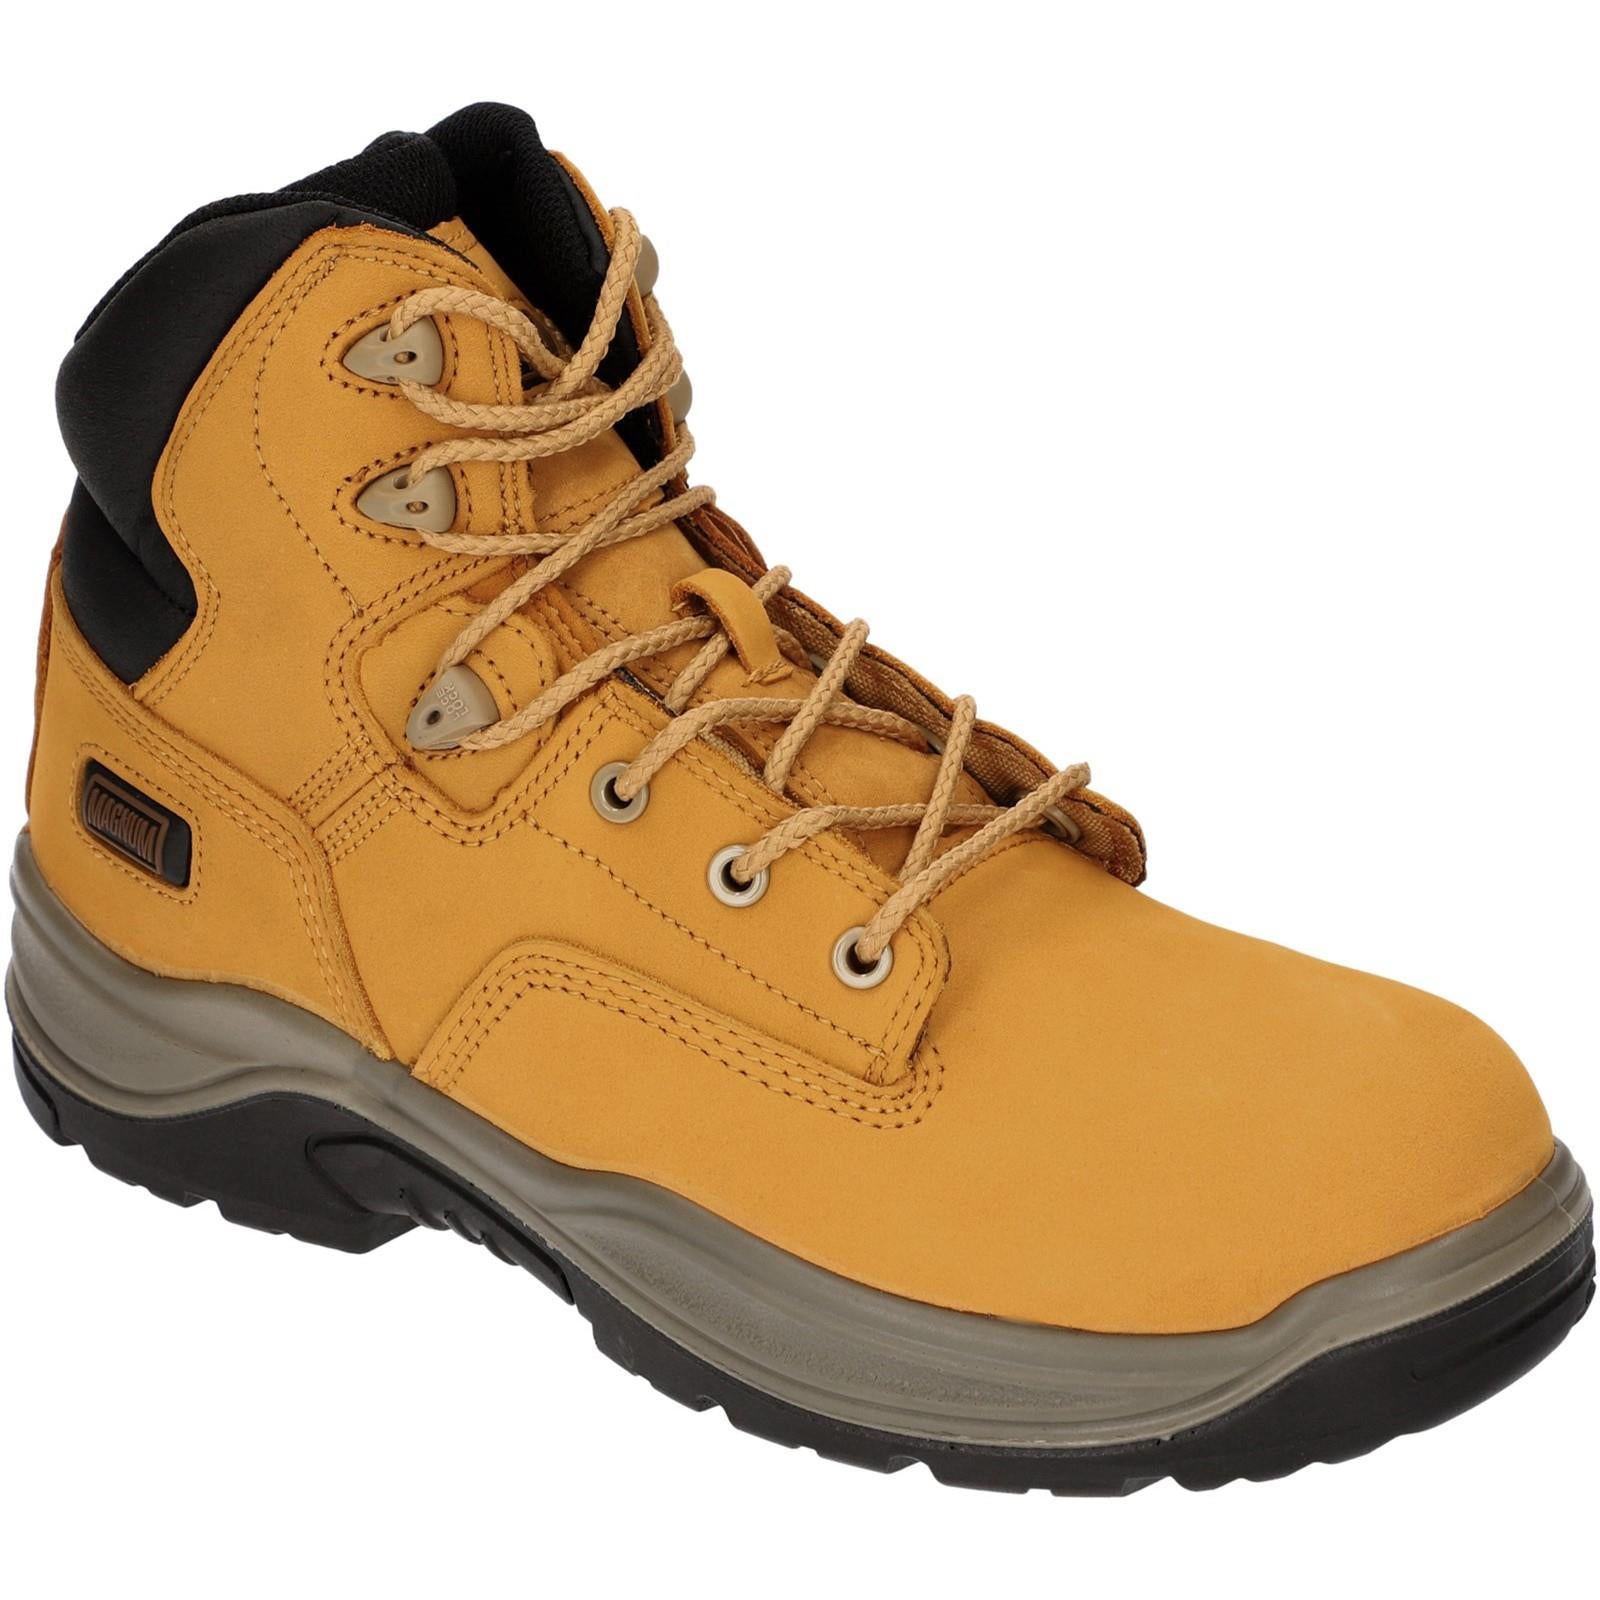 MAGNUM Precision Sitemaster S3 honey nubuck composite toe safety boot with midsole